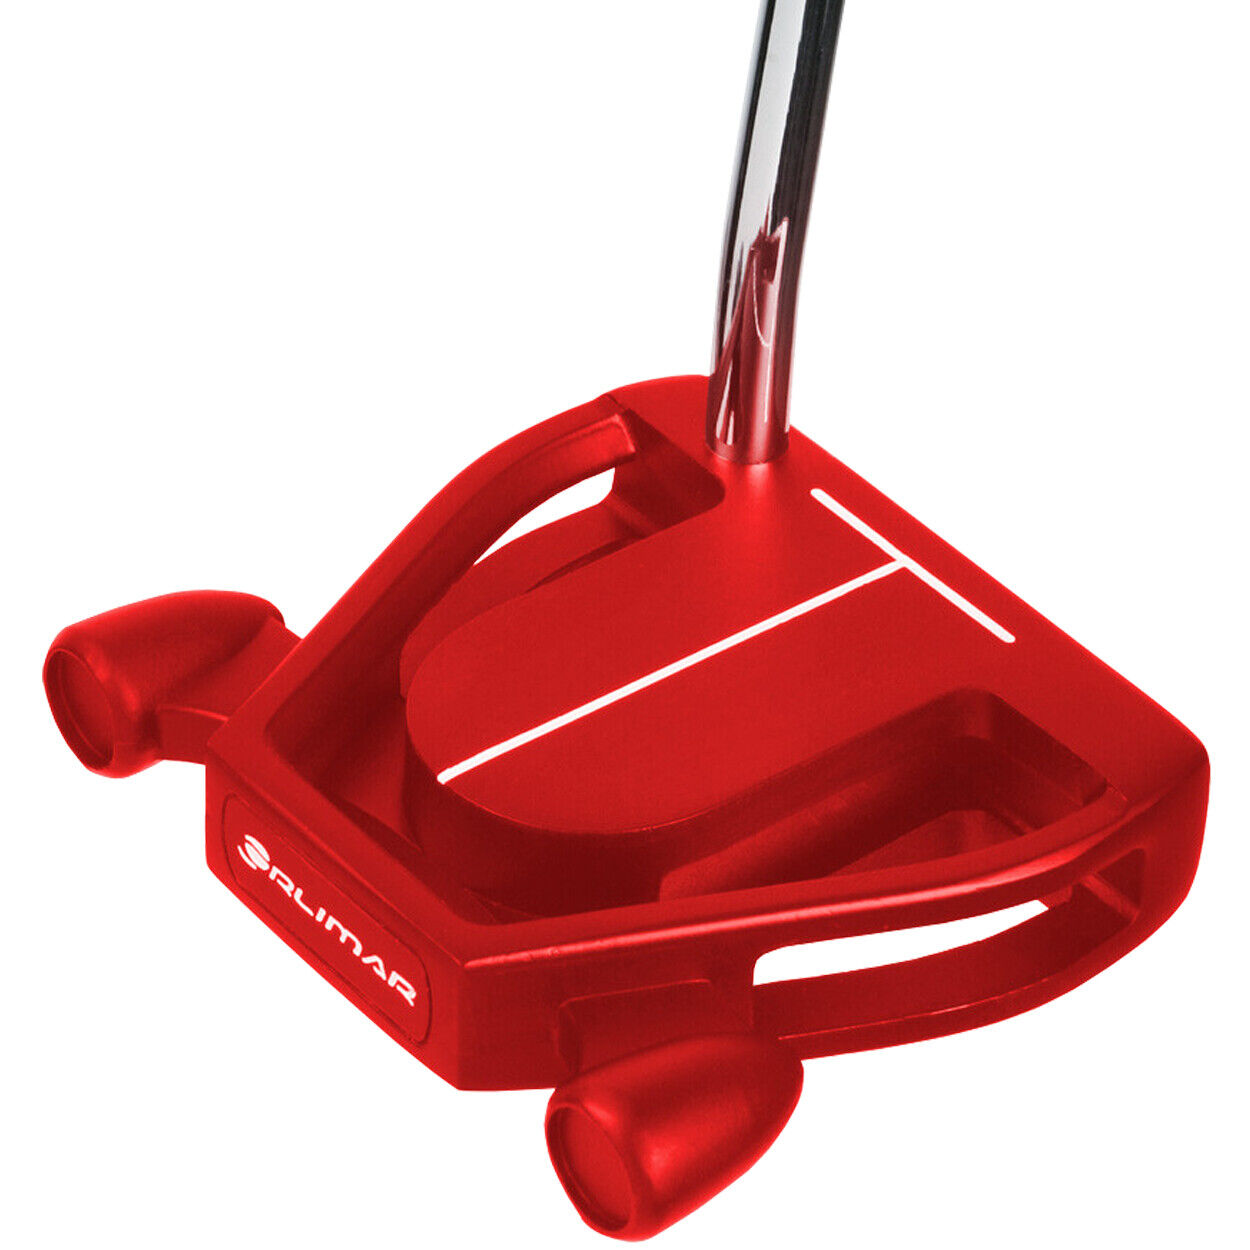 Orlimar Golf Clubs Red F80 Mallet Style Putter, Brand New